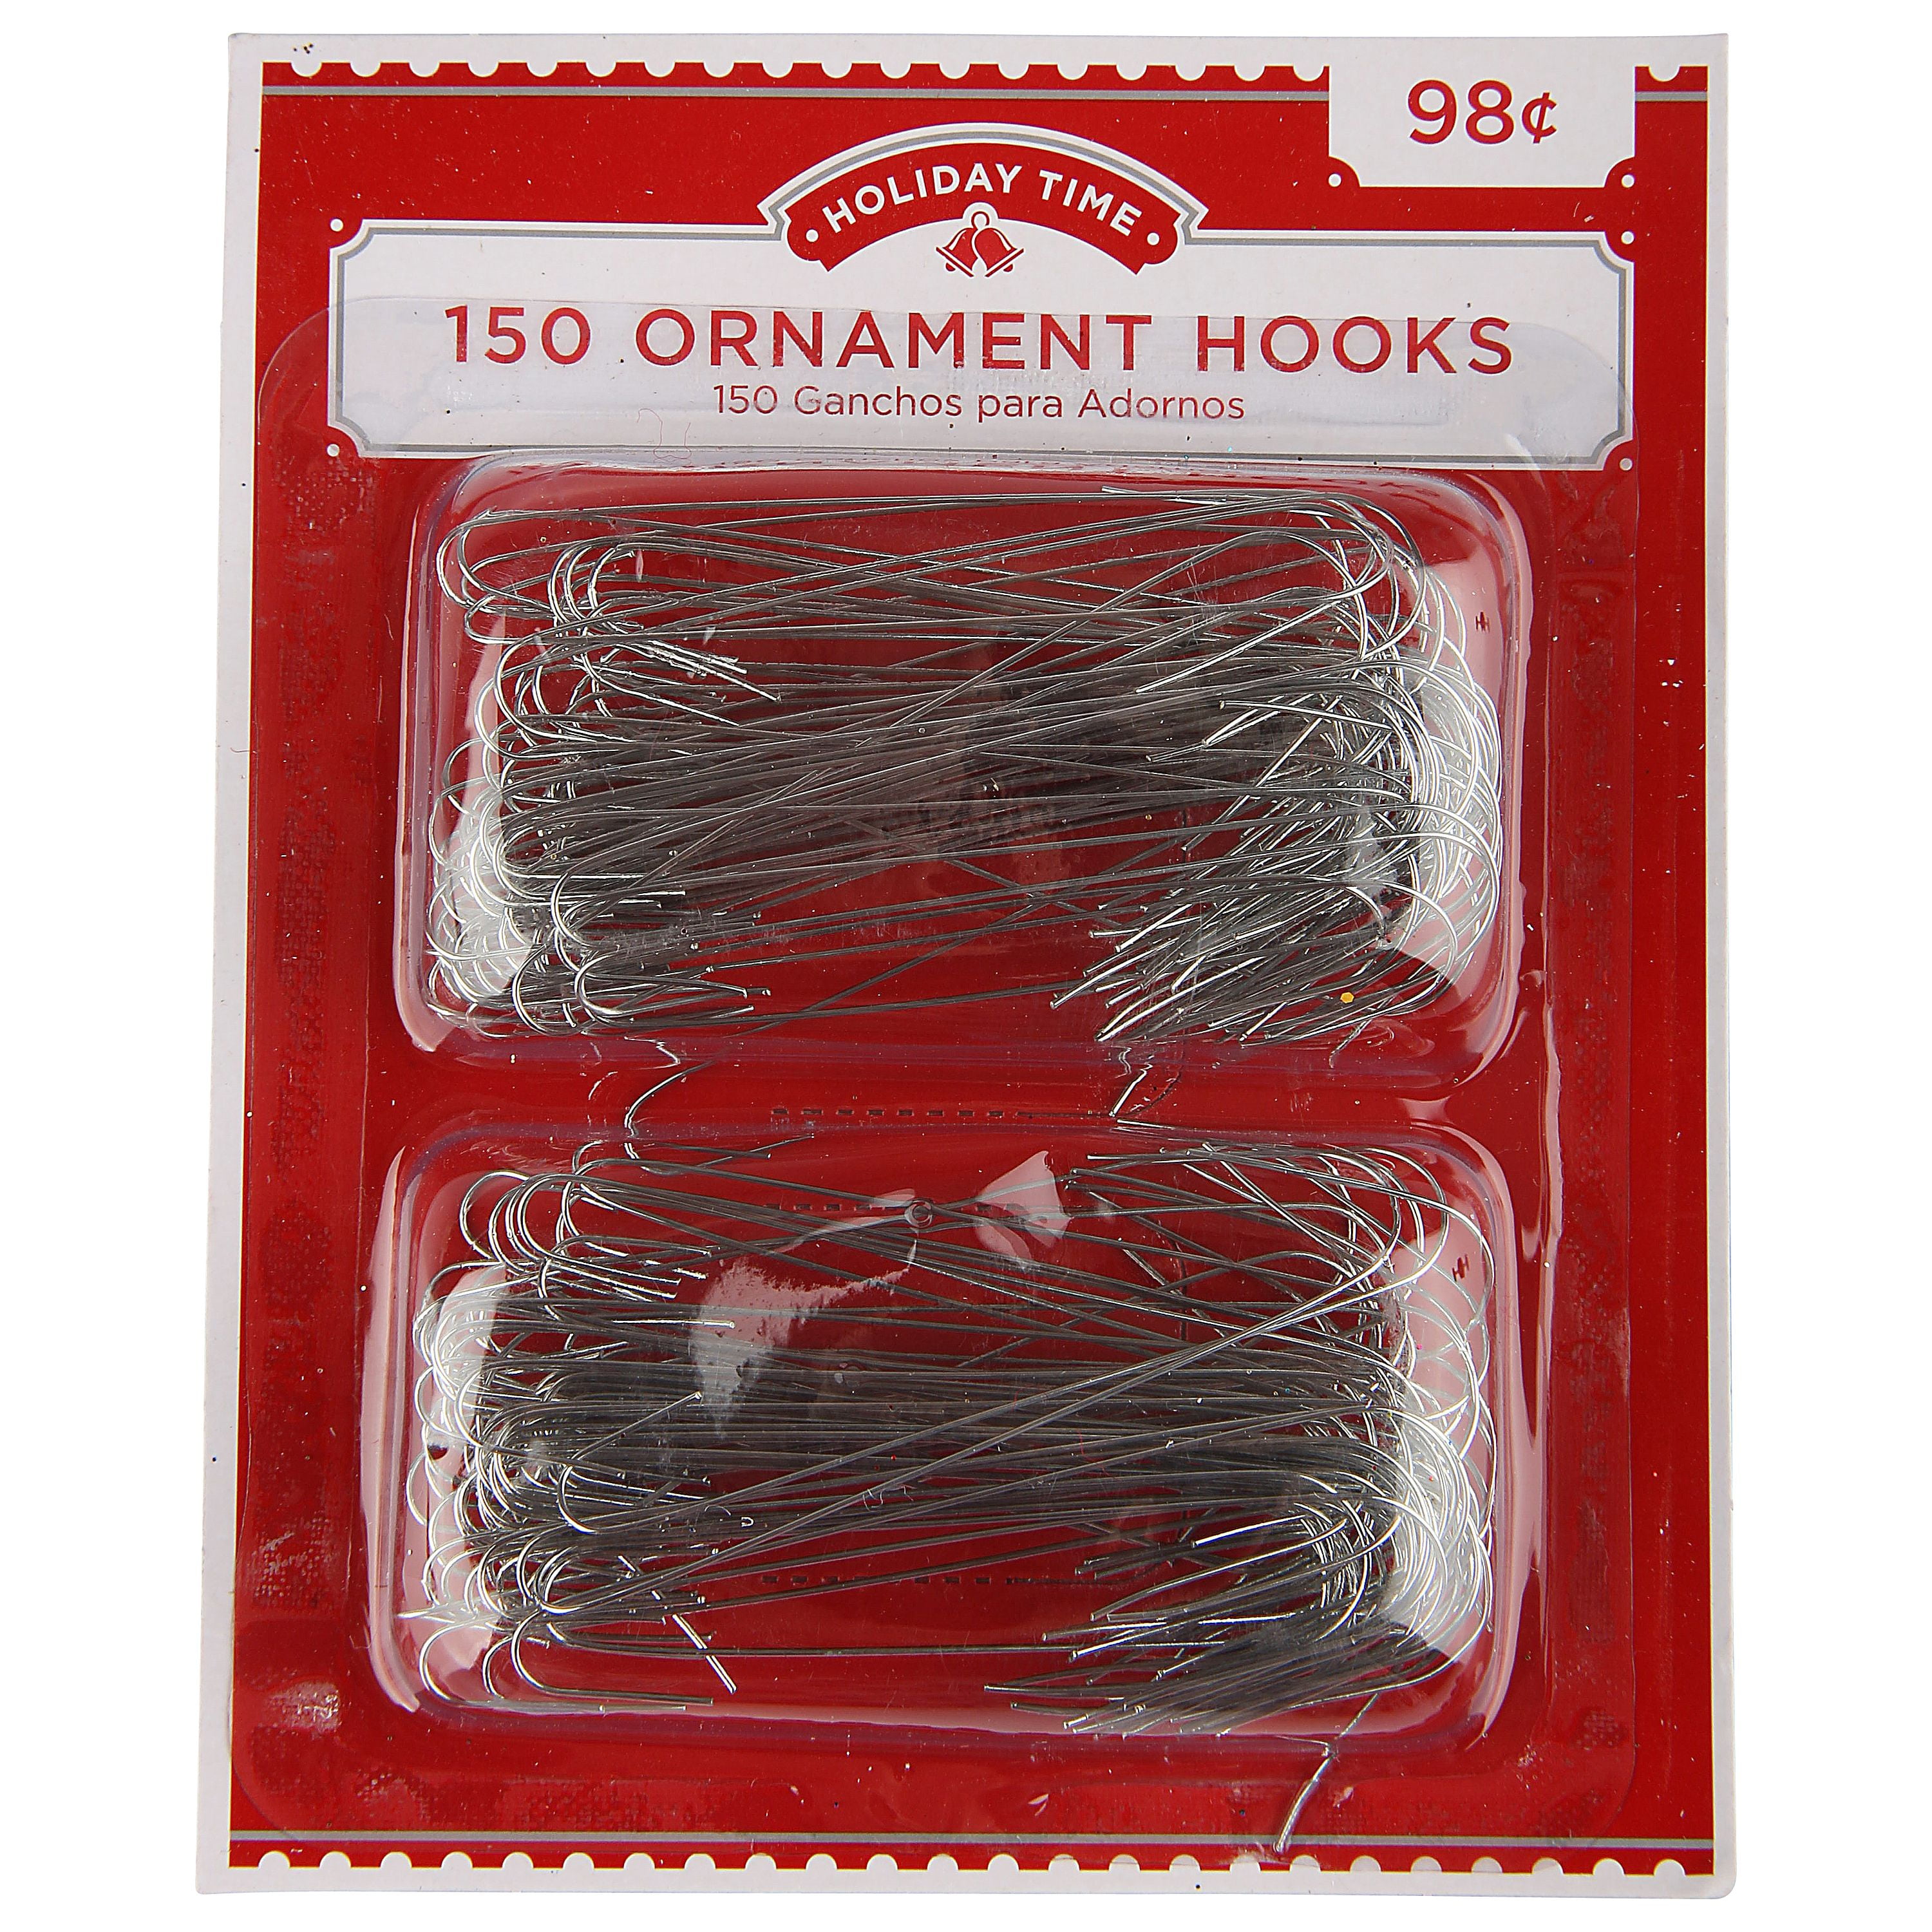 Silver Ornament Hooks, 150 count